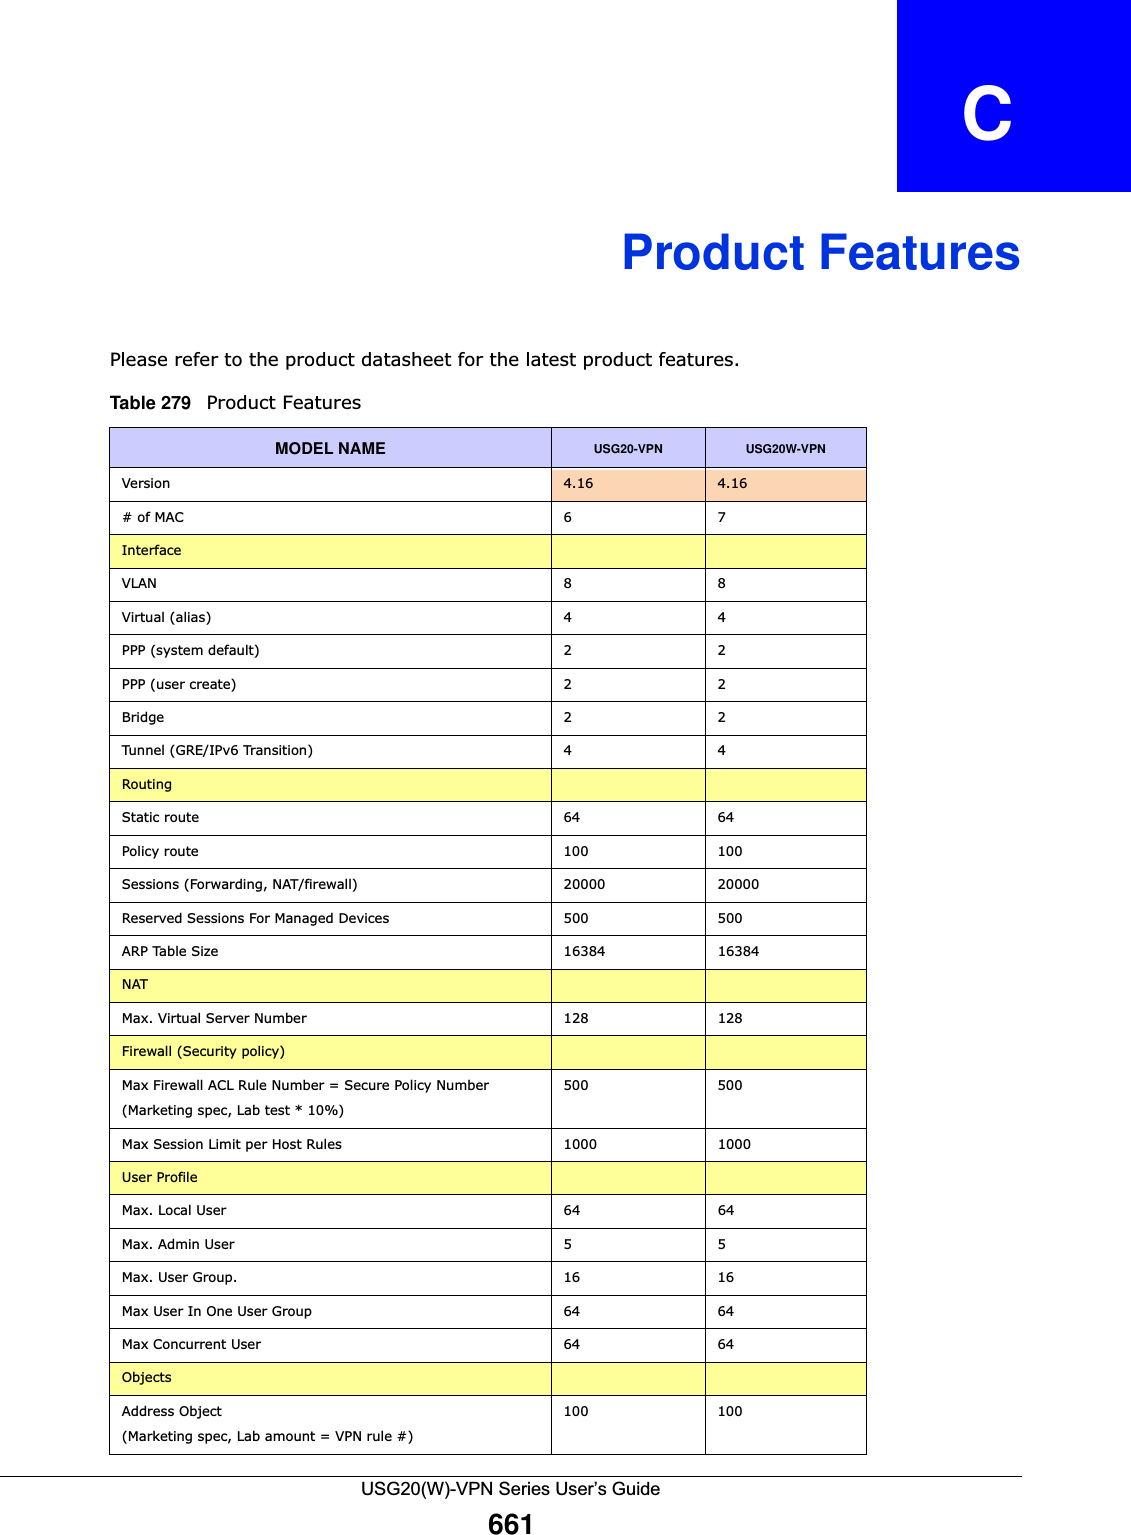 USG20(W)-VPN Series User’s Guide661APPENDIX   CProduct FeaturesPlease refer to the product datasheet for the latest product features. Table 279   Product FeaturesMODEL NAME USG20-VPN USG20W-VPNVersion 4.16 4.16# of MAC 6 7InterfaceVLAN 8 8Virtual (alias) 4 4PPP (system default) 2 2PPP (user create) 2 2Bridge 2 2Tunnel (GRE/IPv6 Transition) 4 4RoutingStatic route 64 64Policy route 100 100Sessions (Forwarding, NAT/firewall) 20000 20000Reserved Sessions For Managed Devices 500 500ARP Table Size 16384 16384NATMax. Virtual Server Number 128 128Firewall (Security policy)Max Firewall ACL Rule Number = Secure Policy Number(Marketing spec, Lab test * 10%)500 500Max Session Limit per Host Rules 1000 1000User ProfileMax. Local User 64 64Max. Admin User 5 5Max. User Group. 16 16Max User In One User Group 64 64Max Concurrent User 64 64ObjectsAddress Object(Marketing spec, Lab amount = VPN rule #)100 100